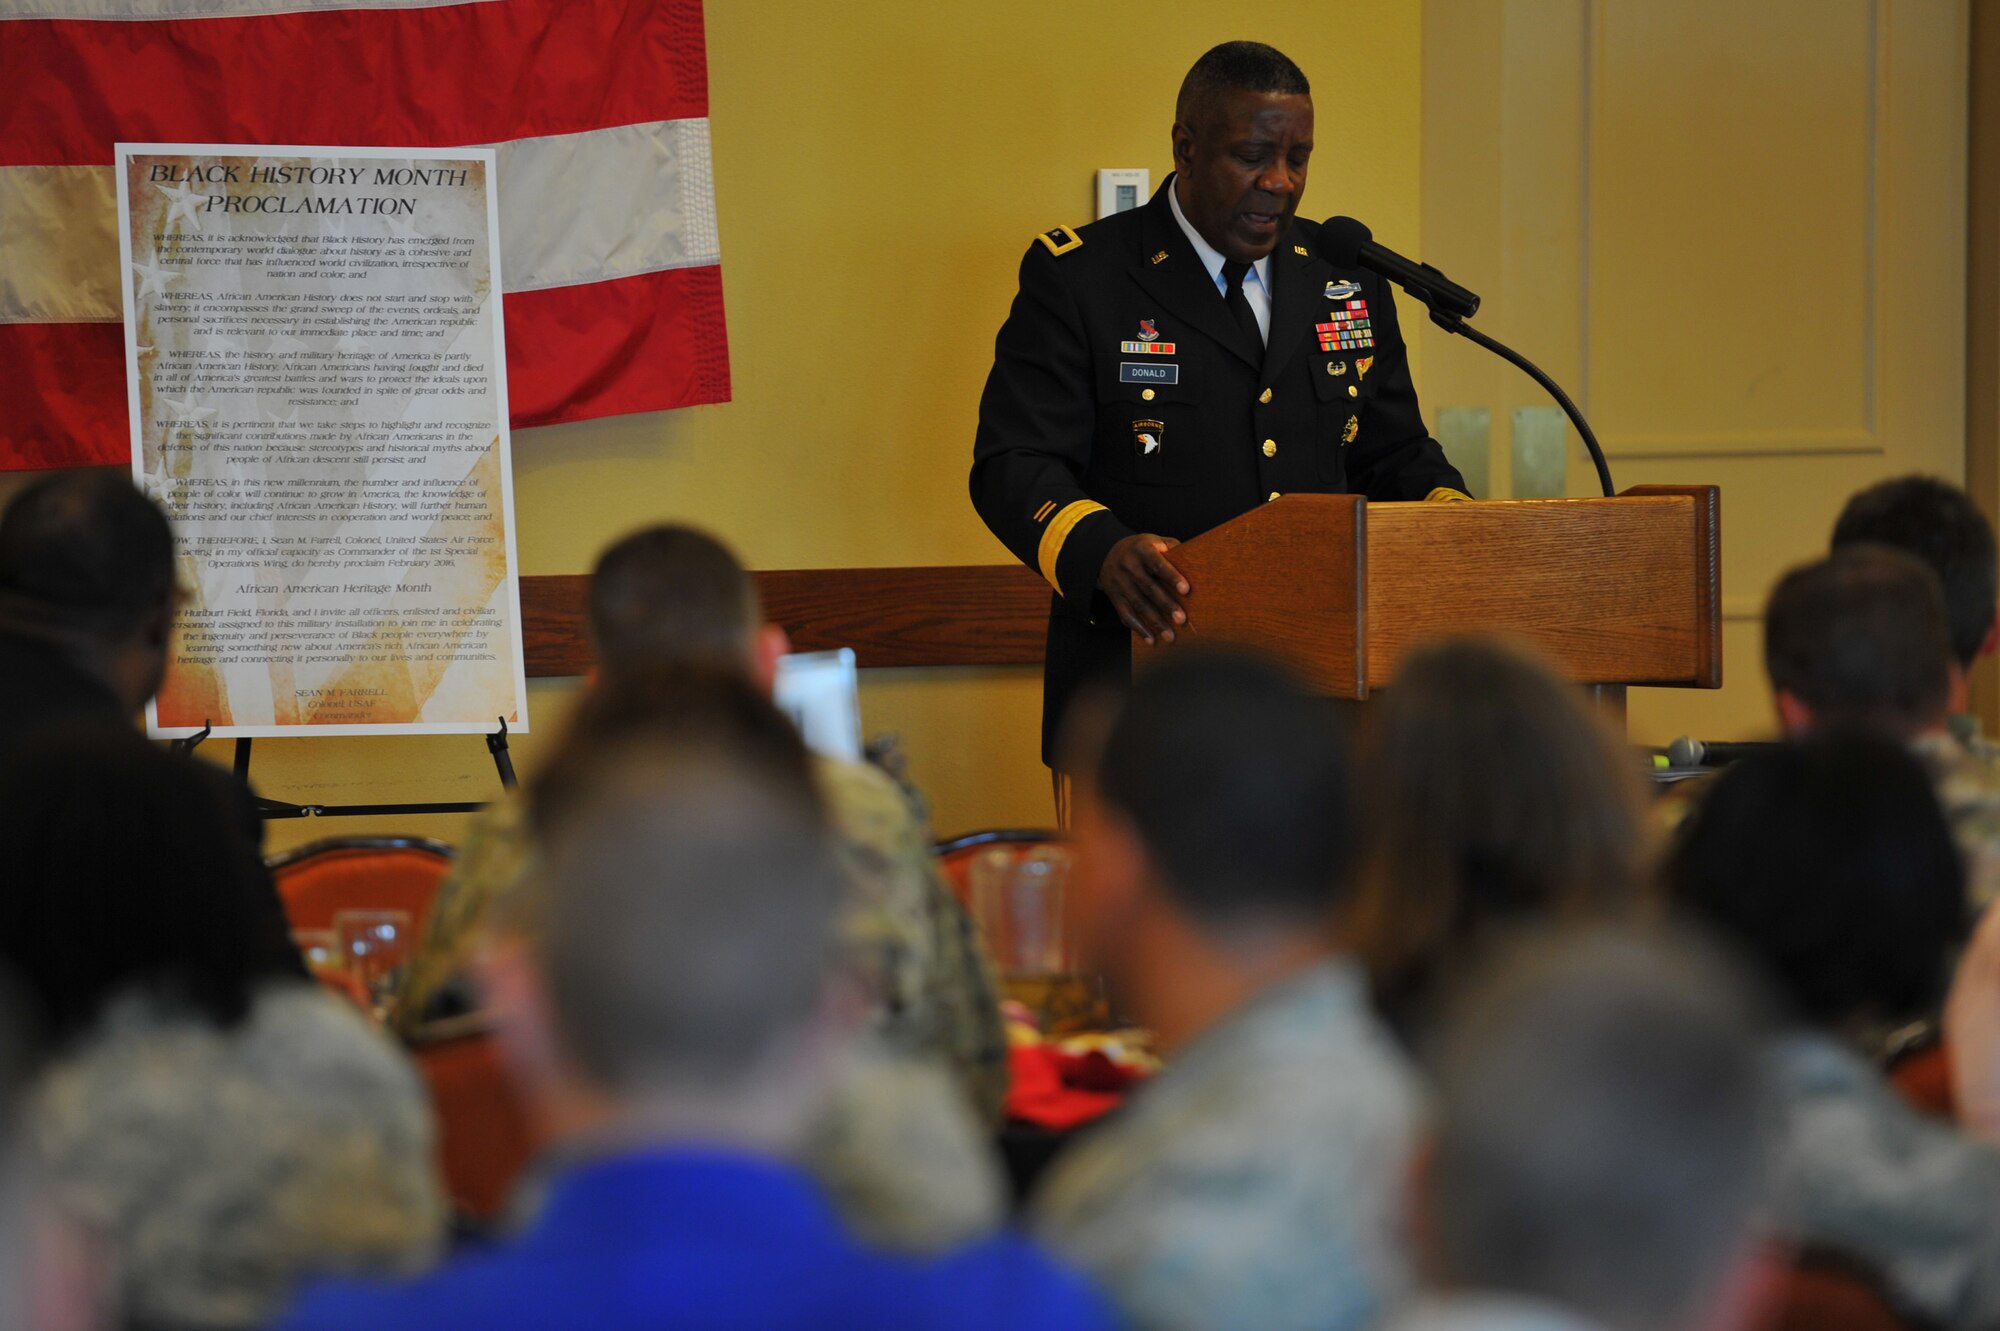 Retired U.S. Army Brig. Gen. James Donald speaks to more than 100 Air Commandos during Hurlburt Field’s African American Heritage Month kick-off luncheon at The Soundside Catering on Hurlburt Field, Fla., Feb. 1, 2016. The Jackson, Miss., native and first African American Army ROTC graduate from the University of Mississippi served 33 years in the Army and served in numerous key command and staff assignments. (U.S. Air Force Photo by Airman 1st Class Joseph Pick)